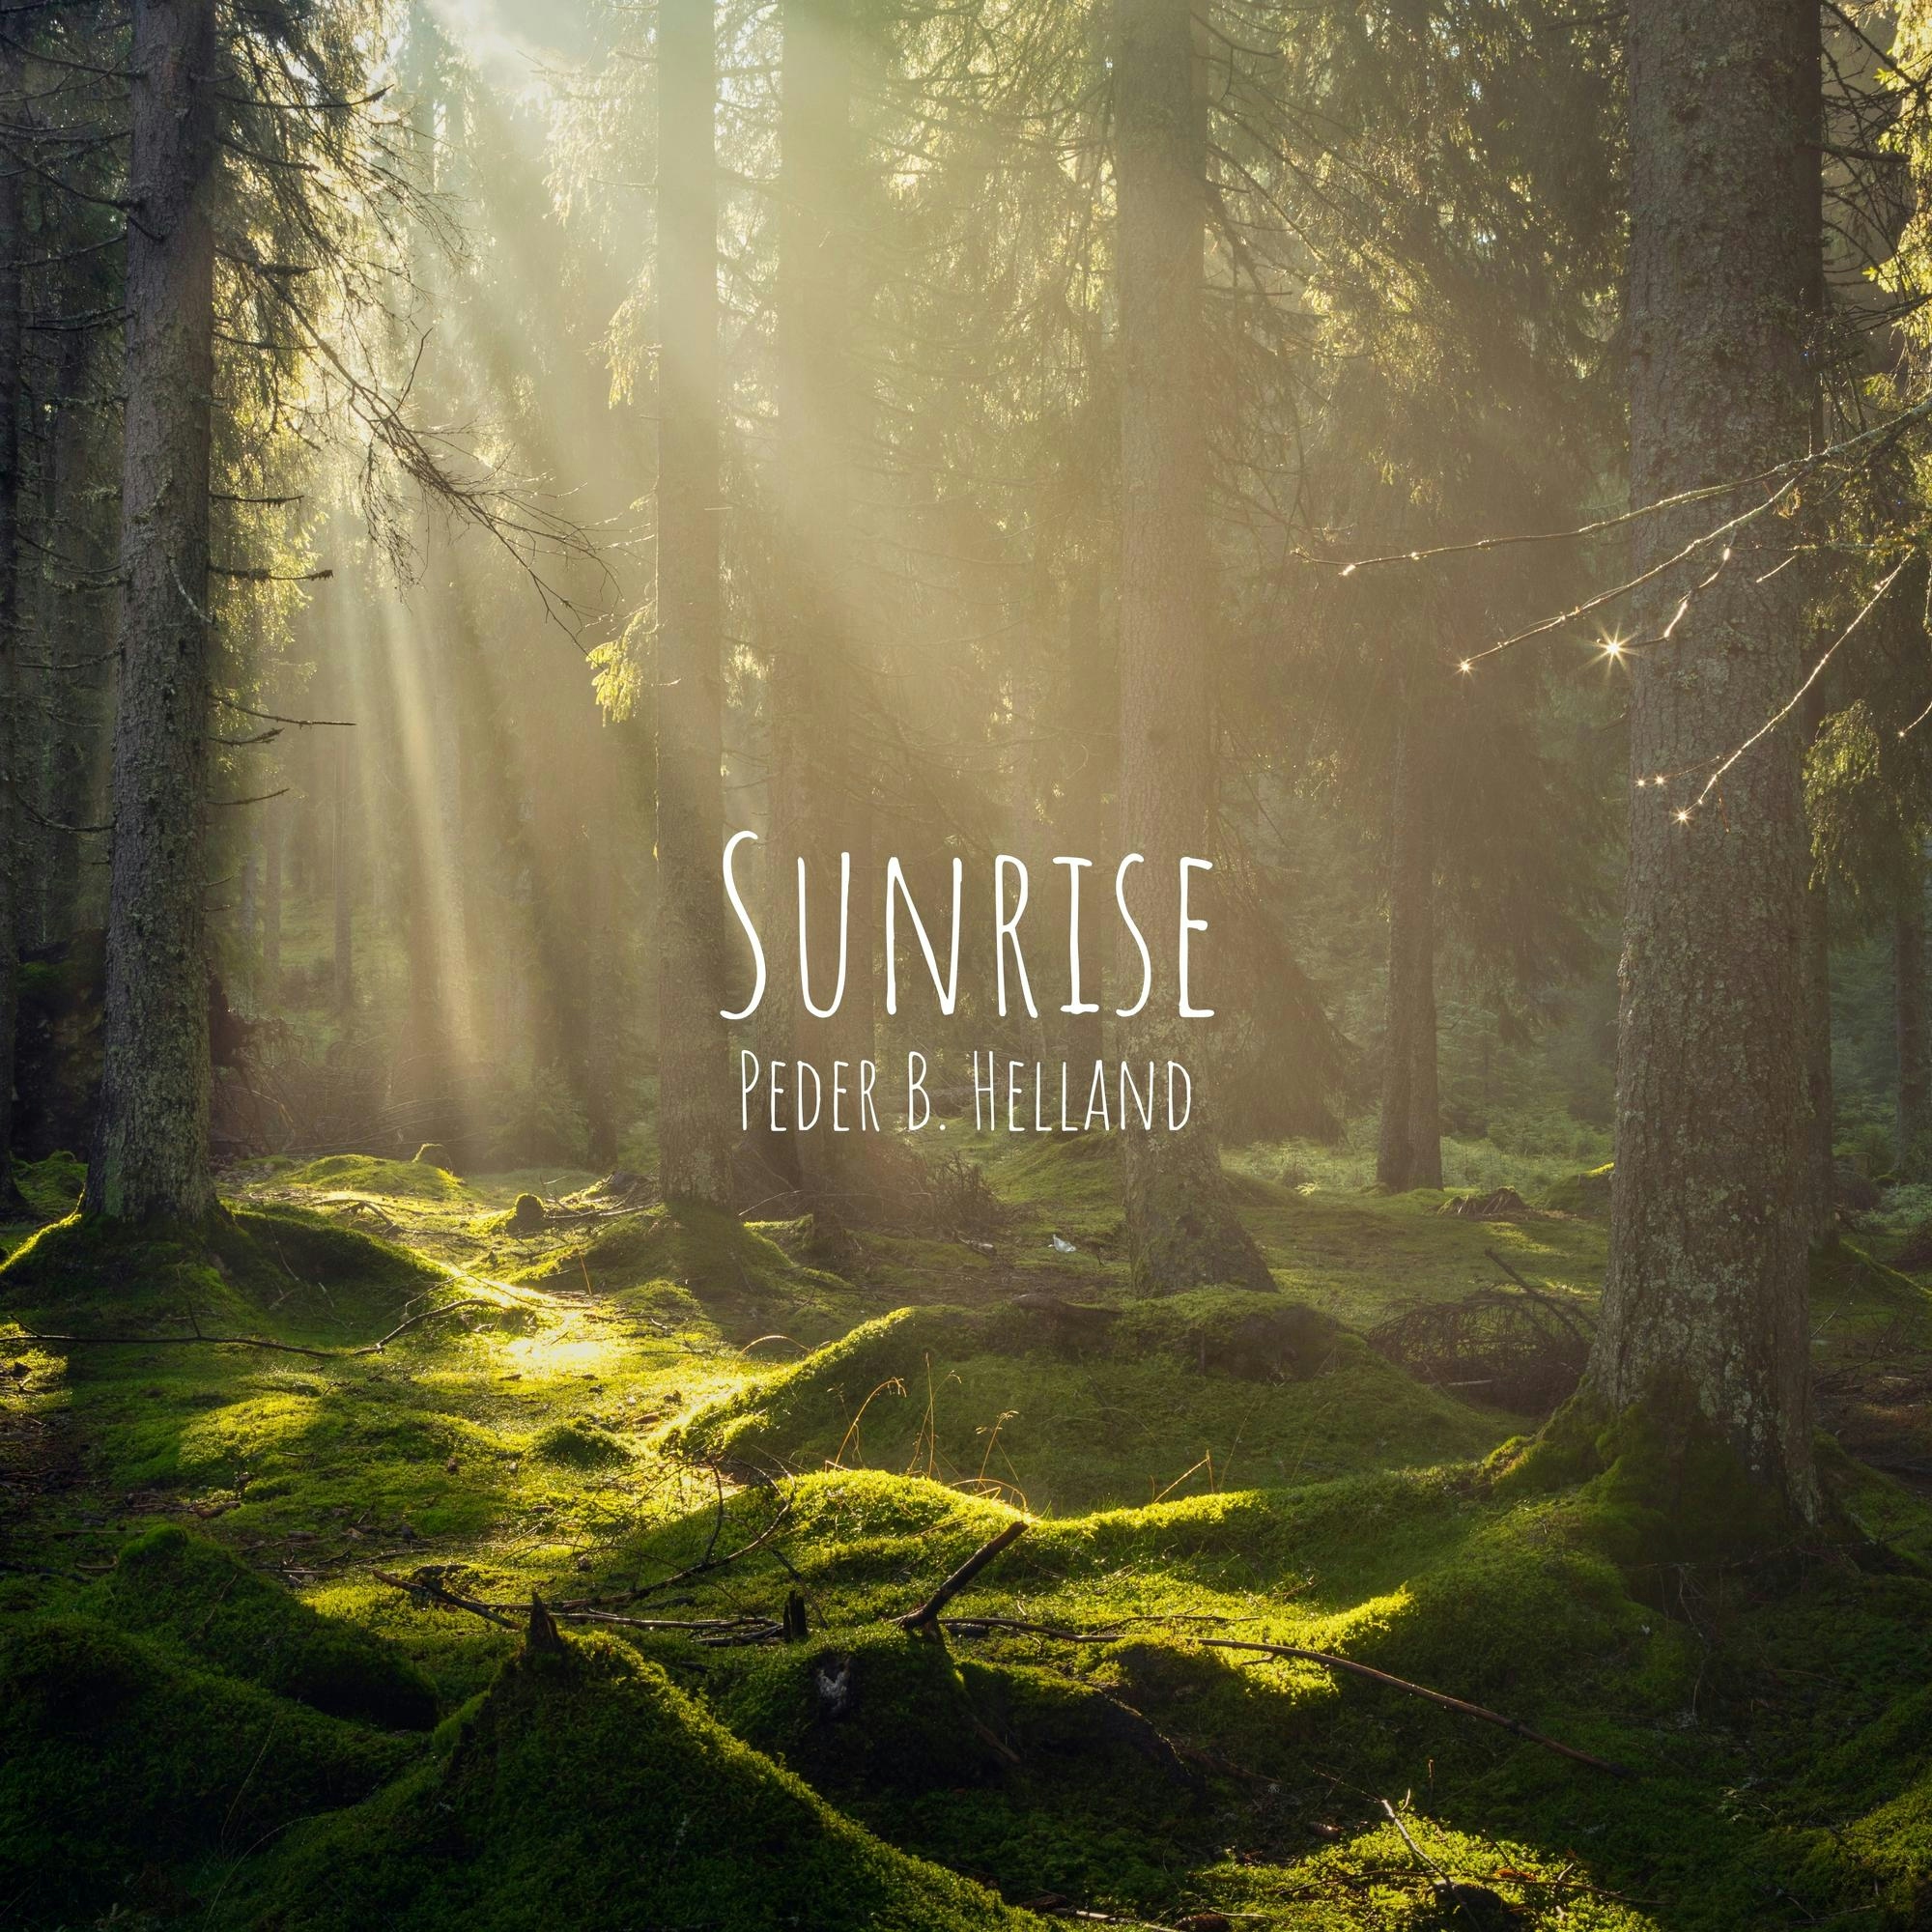 Cover art for the single Sunrise by Peder B. Helland